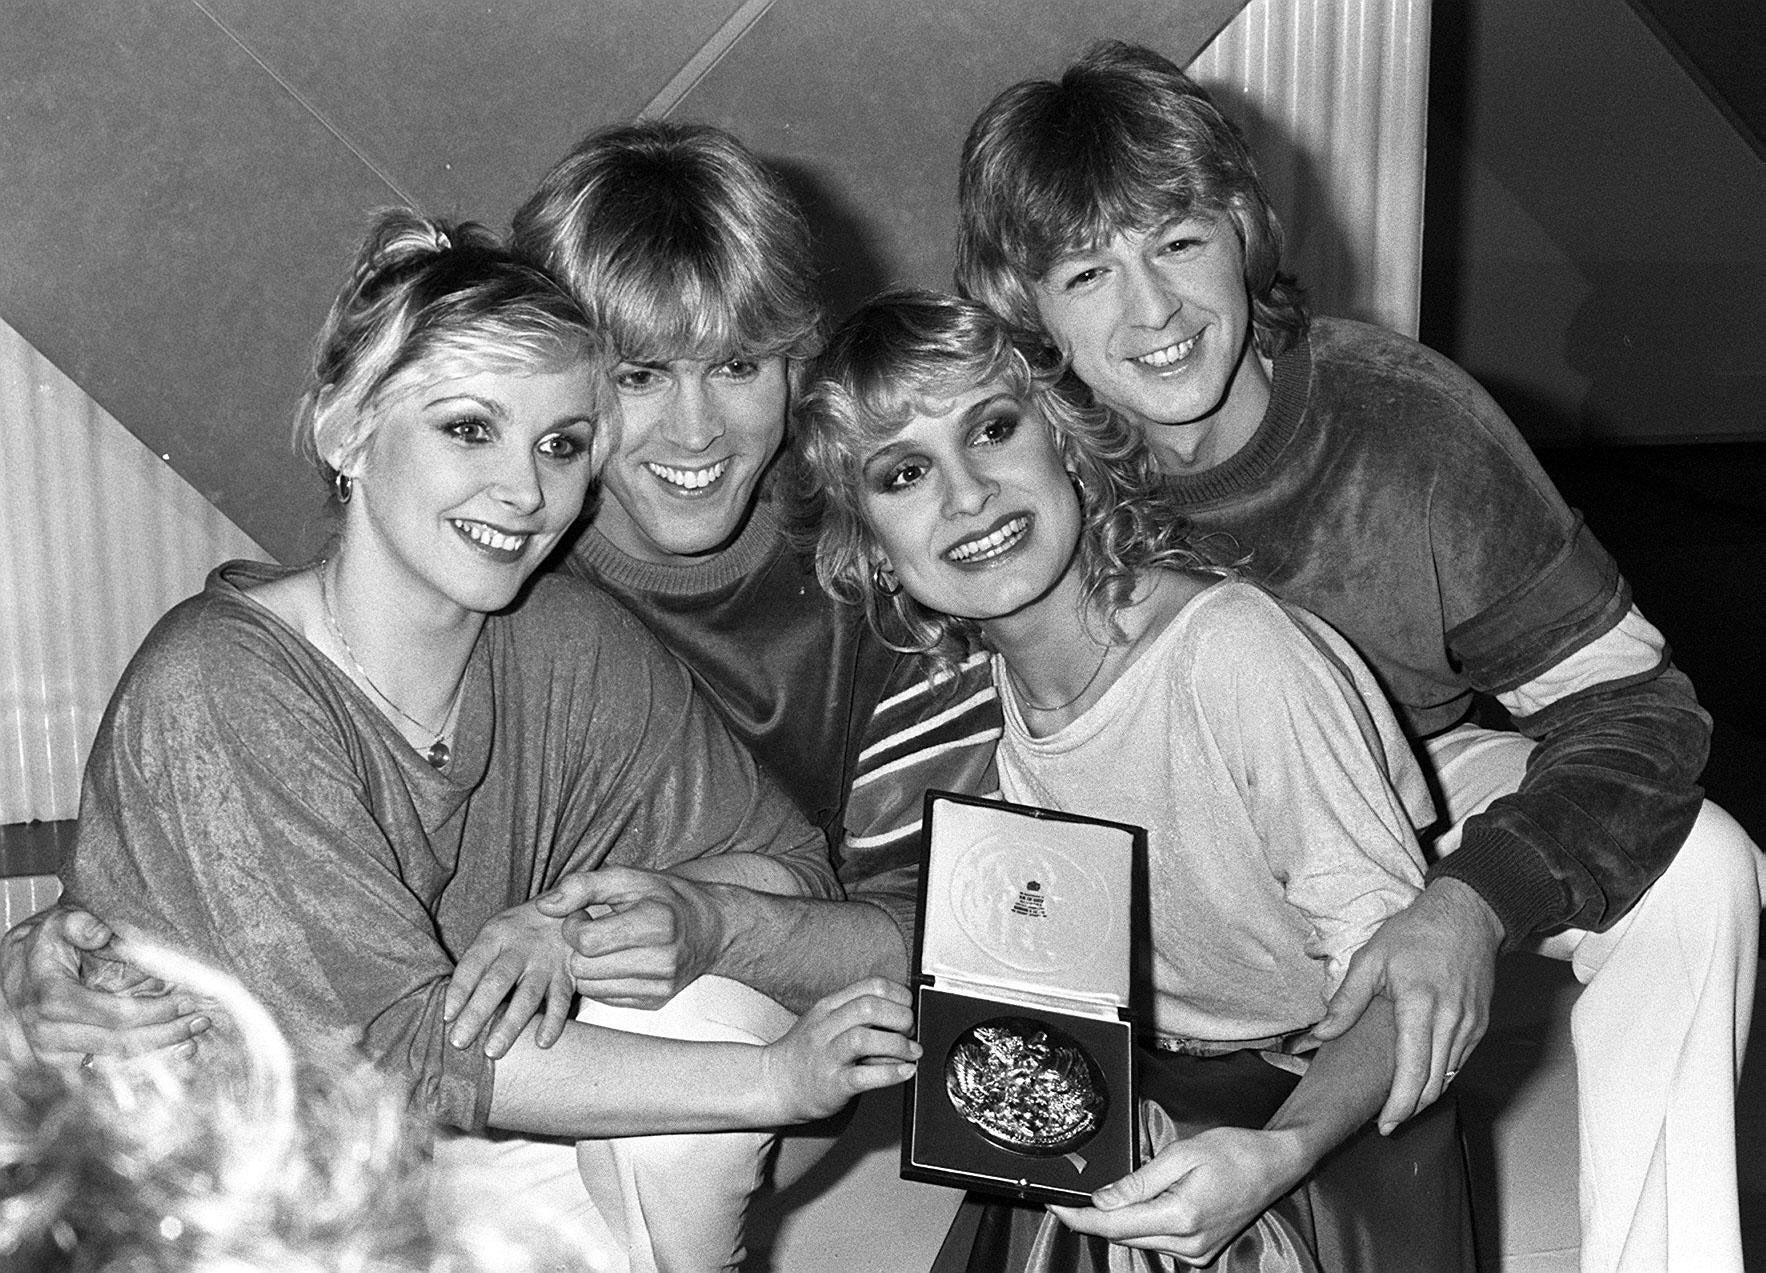 Bucks Fizz, who won the Eurovision Song Contest in 1981